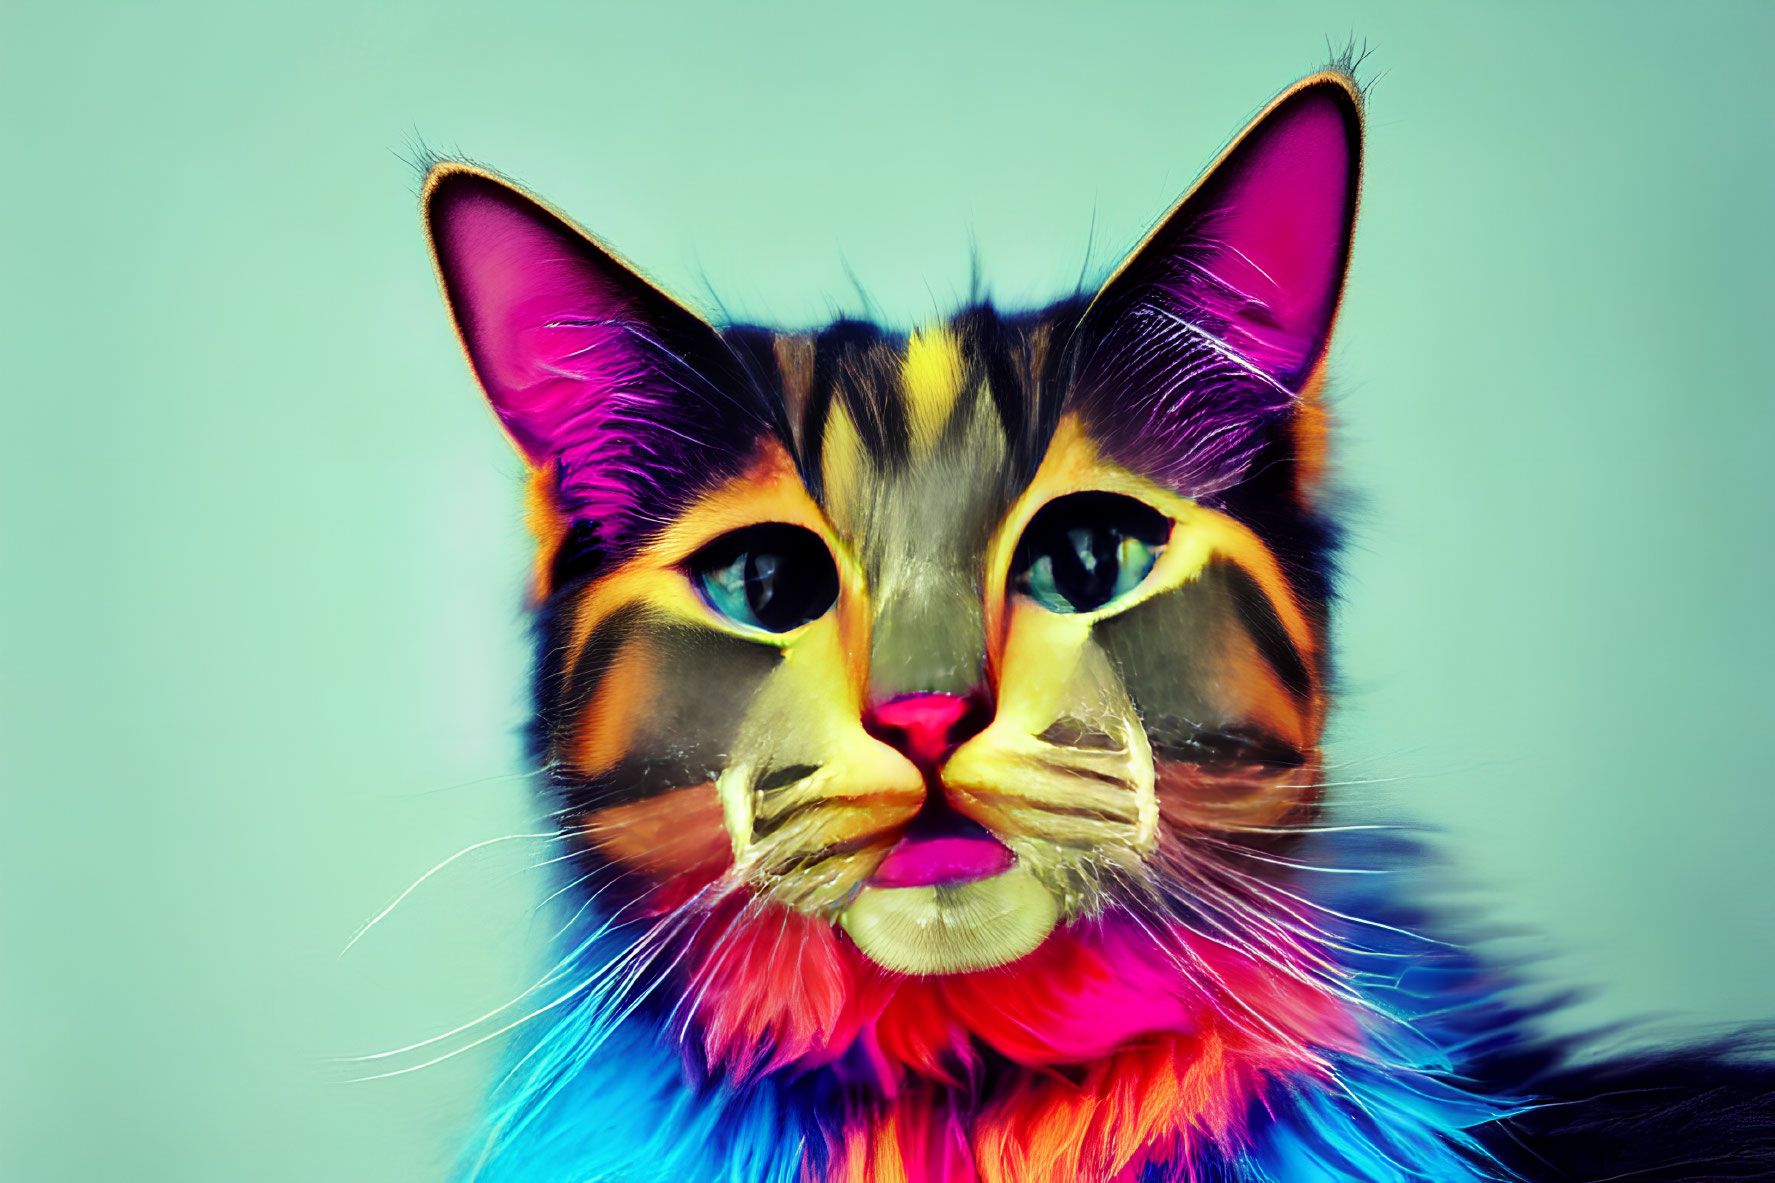 Colorful Digital Artwork: Cat with Blue, Yellow, and Purple Fur on Turquoise Background